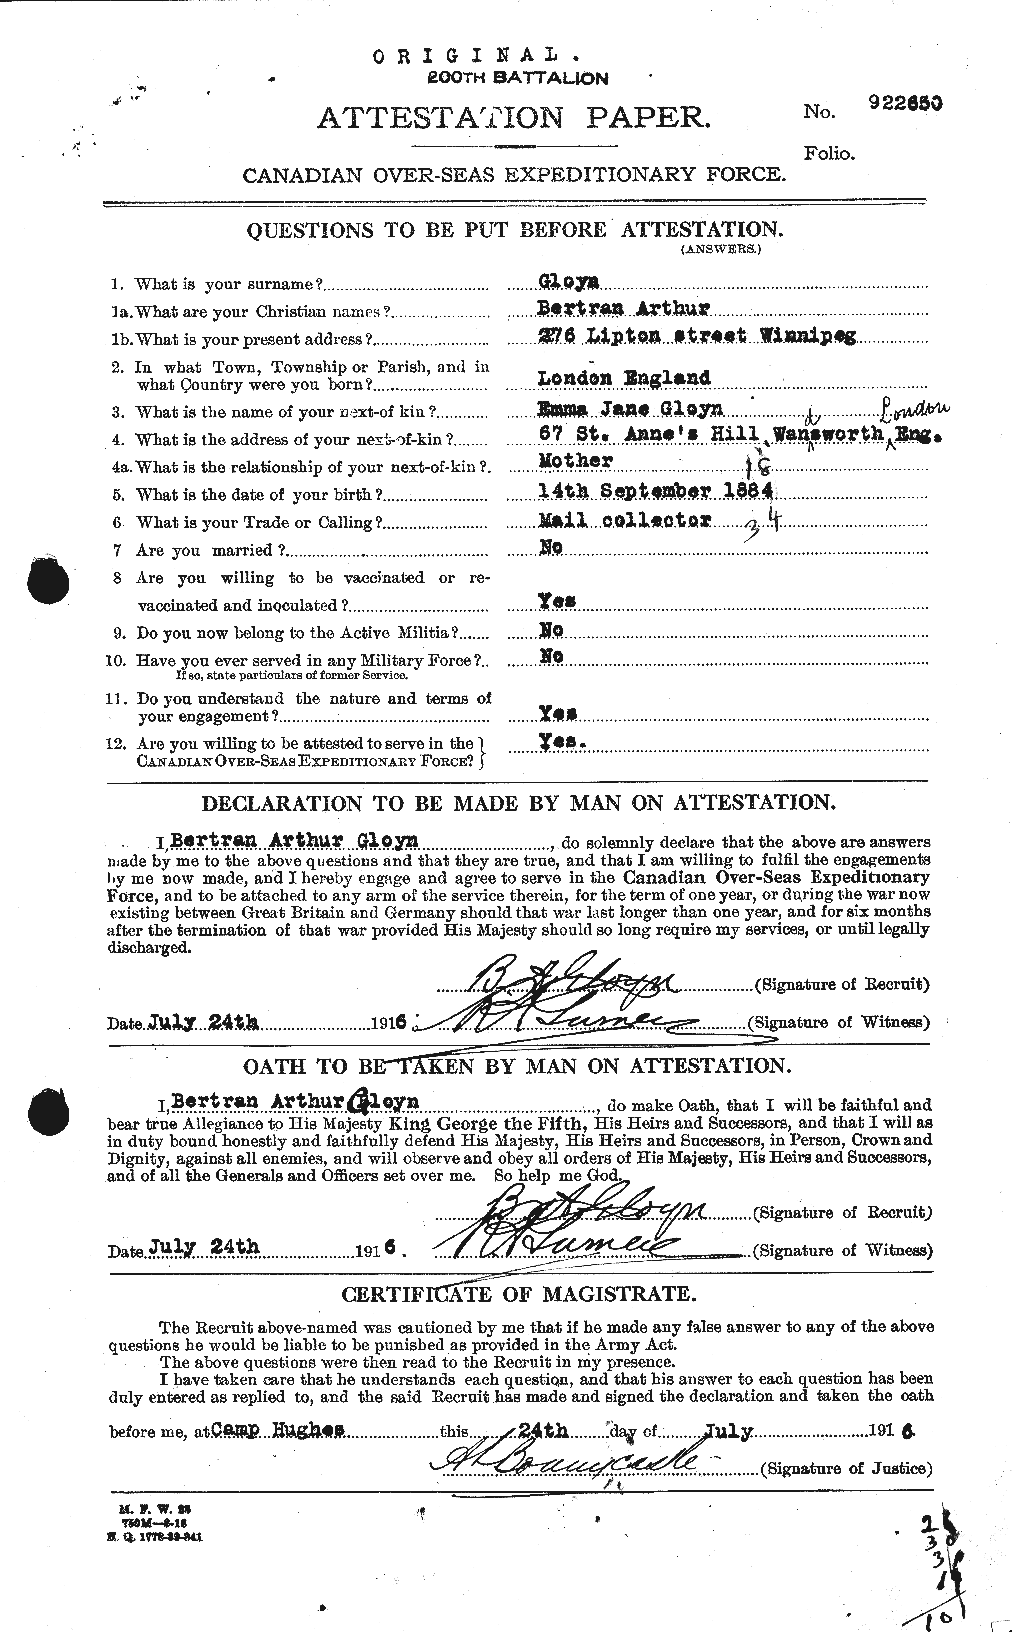 Personnel Records of the First World War - CEF 350747a